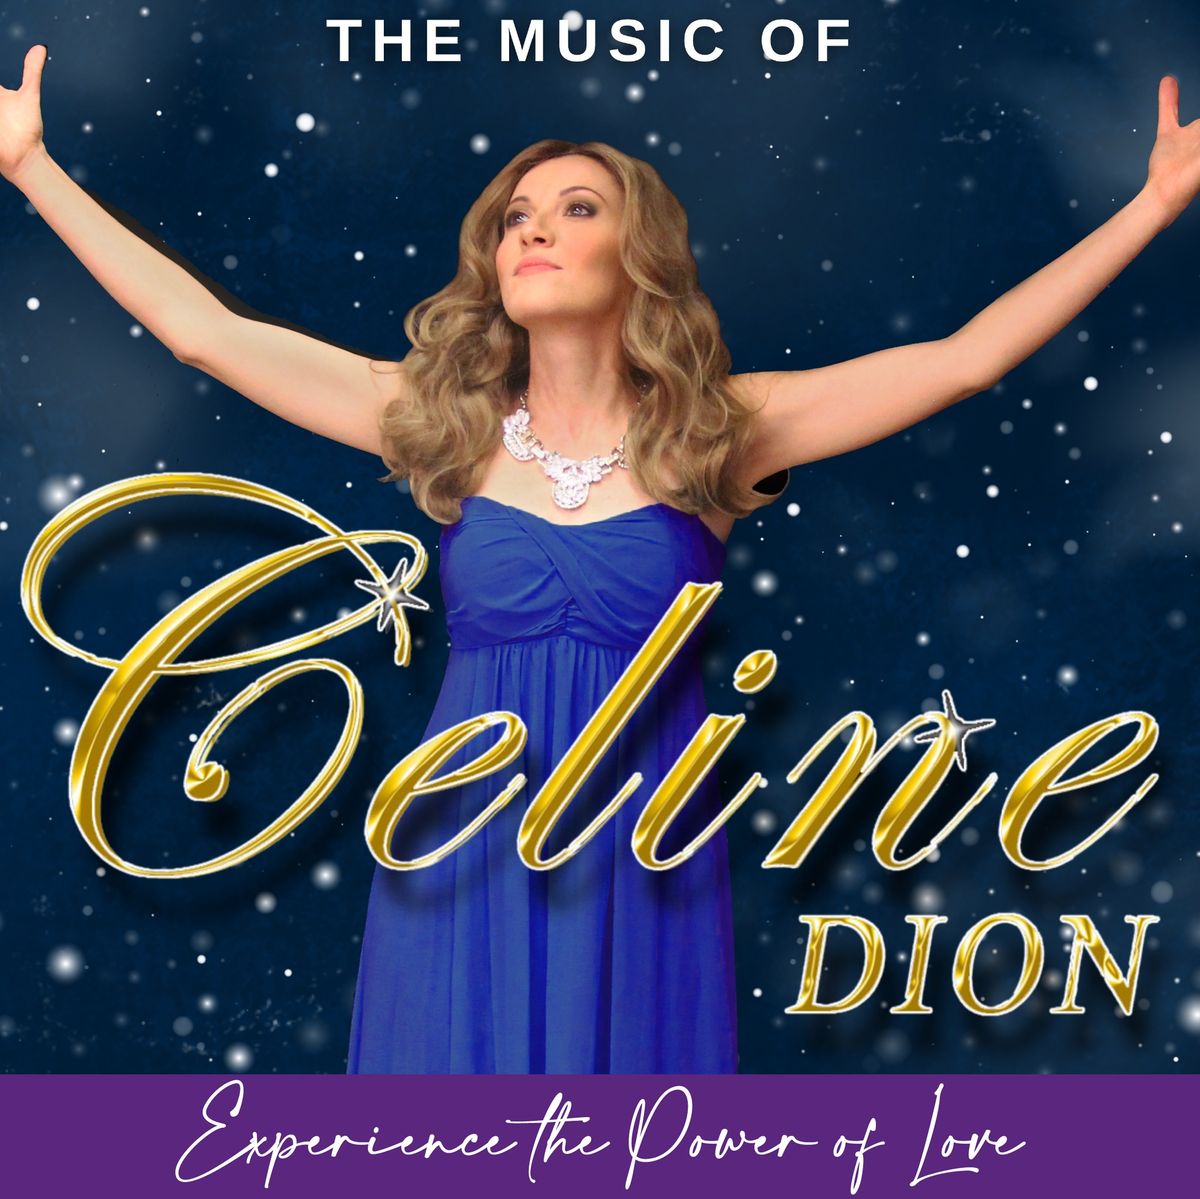 The Music of CELINE DION - Experience the power of love 